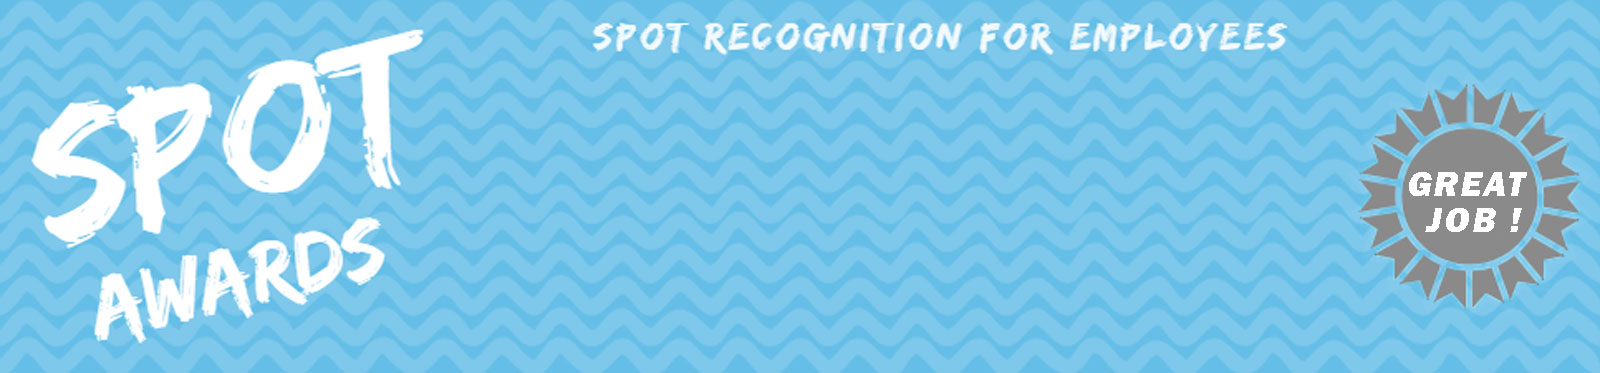 Spot Recognition Awards